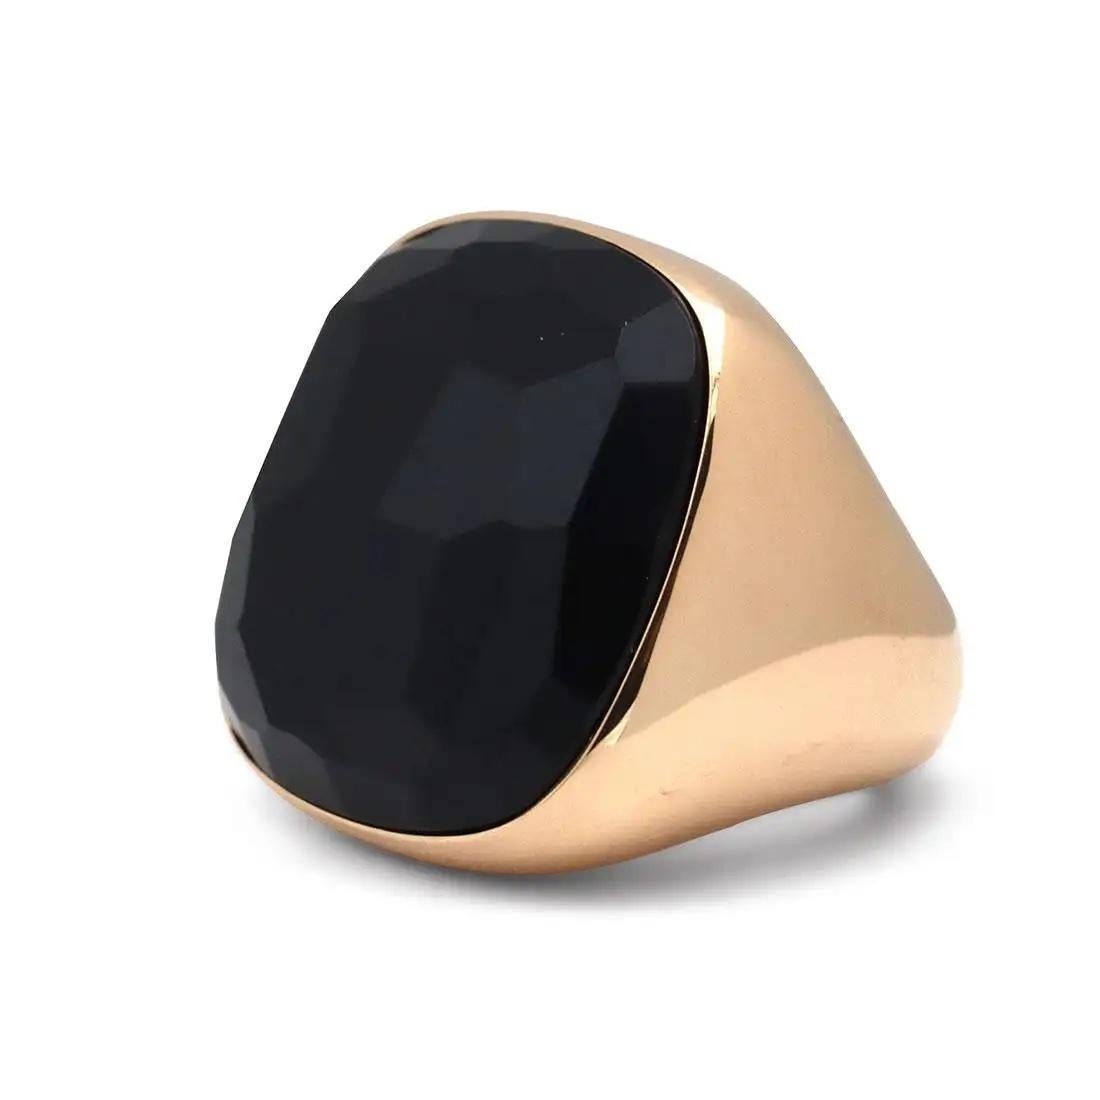 Authentic Pomellato 'Victoria' ring crafted in high polished 18 karat gold and set with a large, faceted jet measuring approximately 25.6mm x 25.6mm. Signed Pomellato, 750, with Italian hallmark. Ring is presented without the original box and